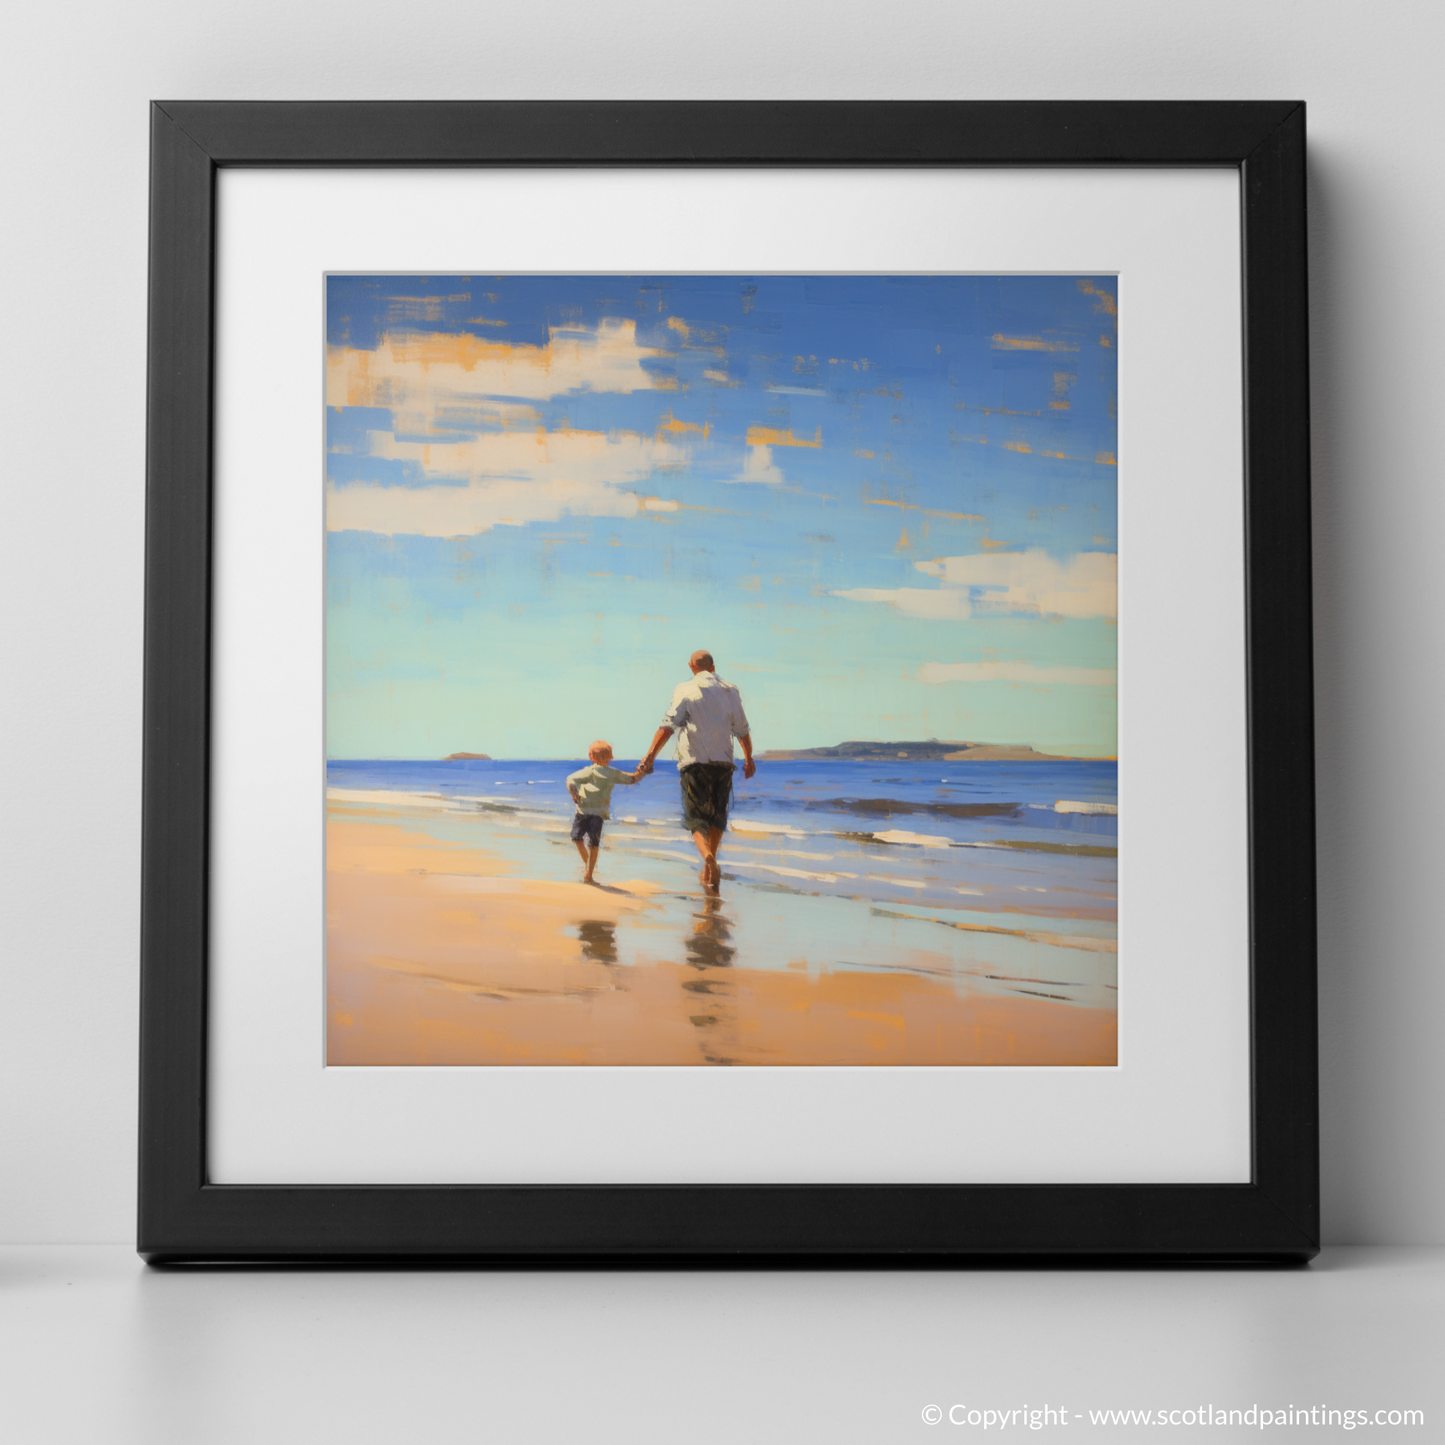 Art Print of A dad and son walking on Coldingham Bay with a black frame